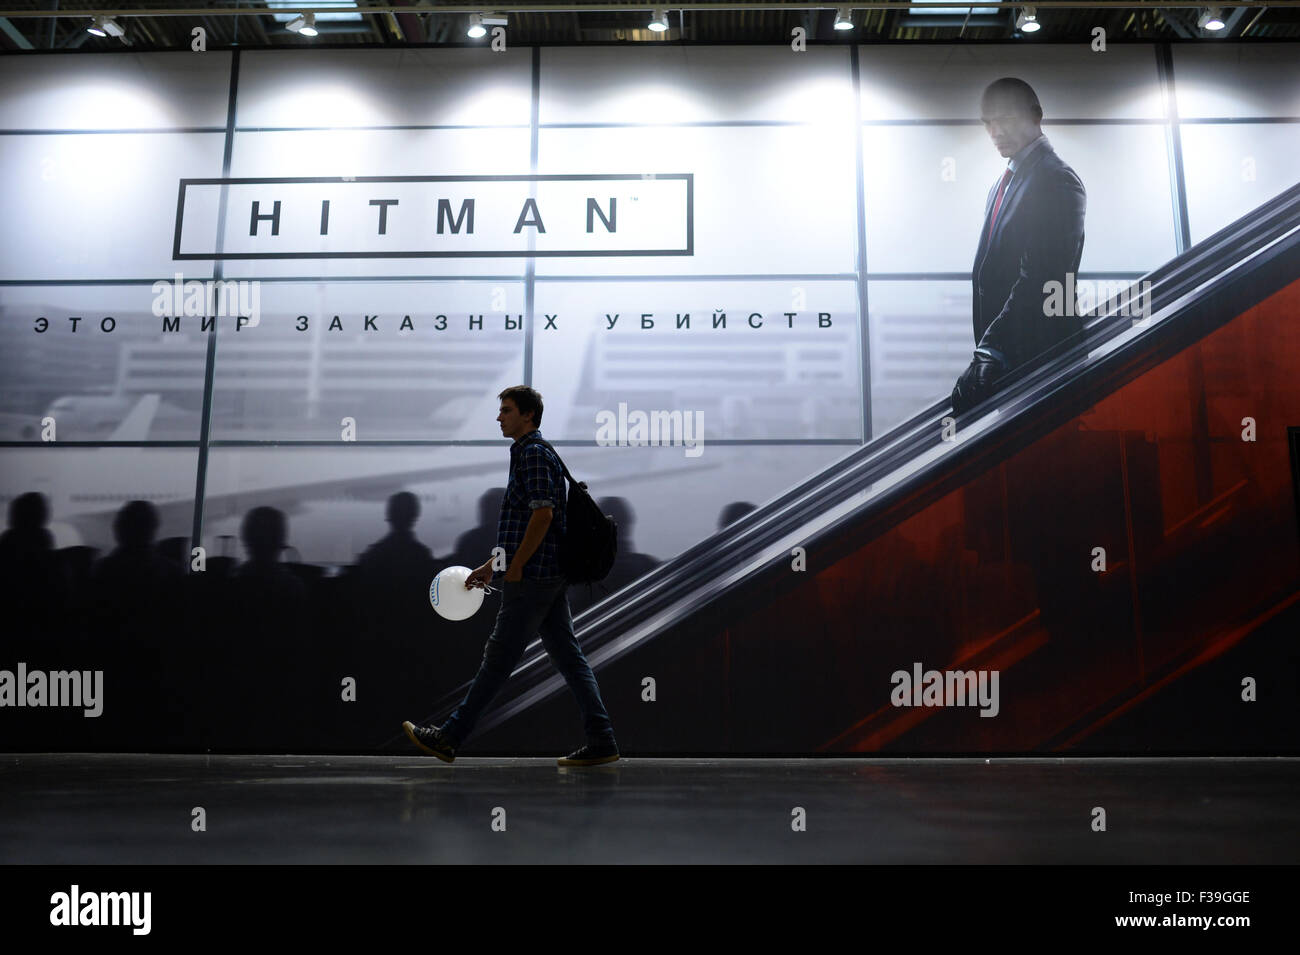 Krasnogorsk, Russia. 2nd Oct, 2015. A man passes by the stand of Hitman game during the ComicCon Russia exhibition in Krasnogorsk, Russia, Oct. 2, 2015. The three-day ComicCon exhibition kicked off here on Friday. © Pavel Bednyakov/Xinhua/Alamy Live News Stock Photo